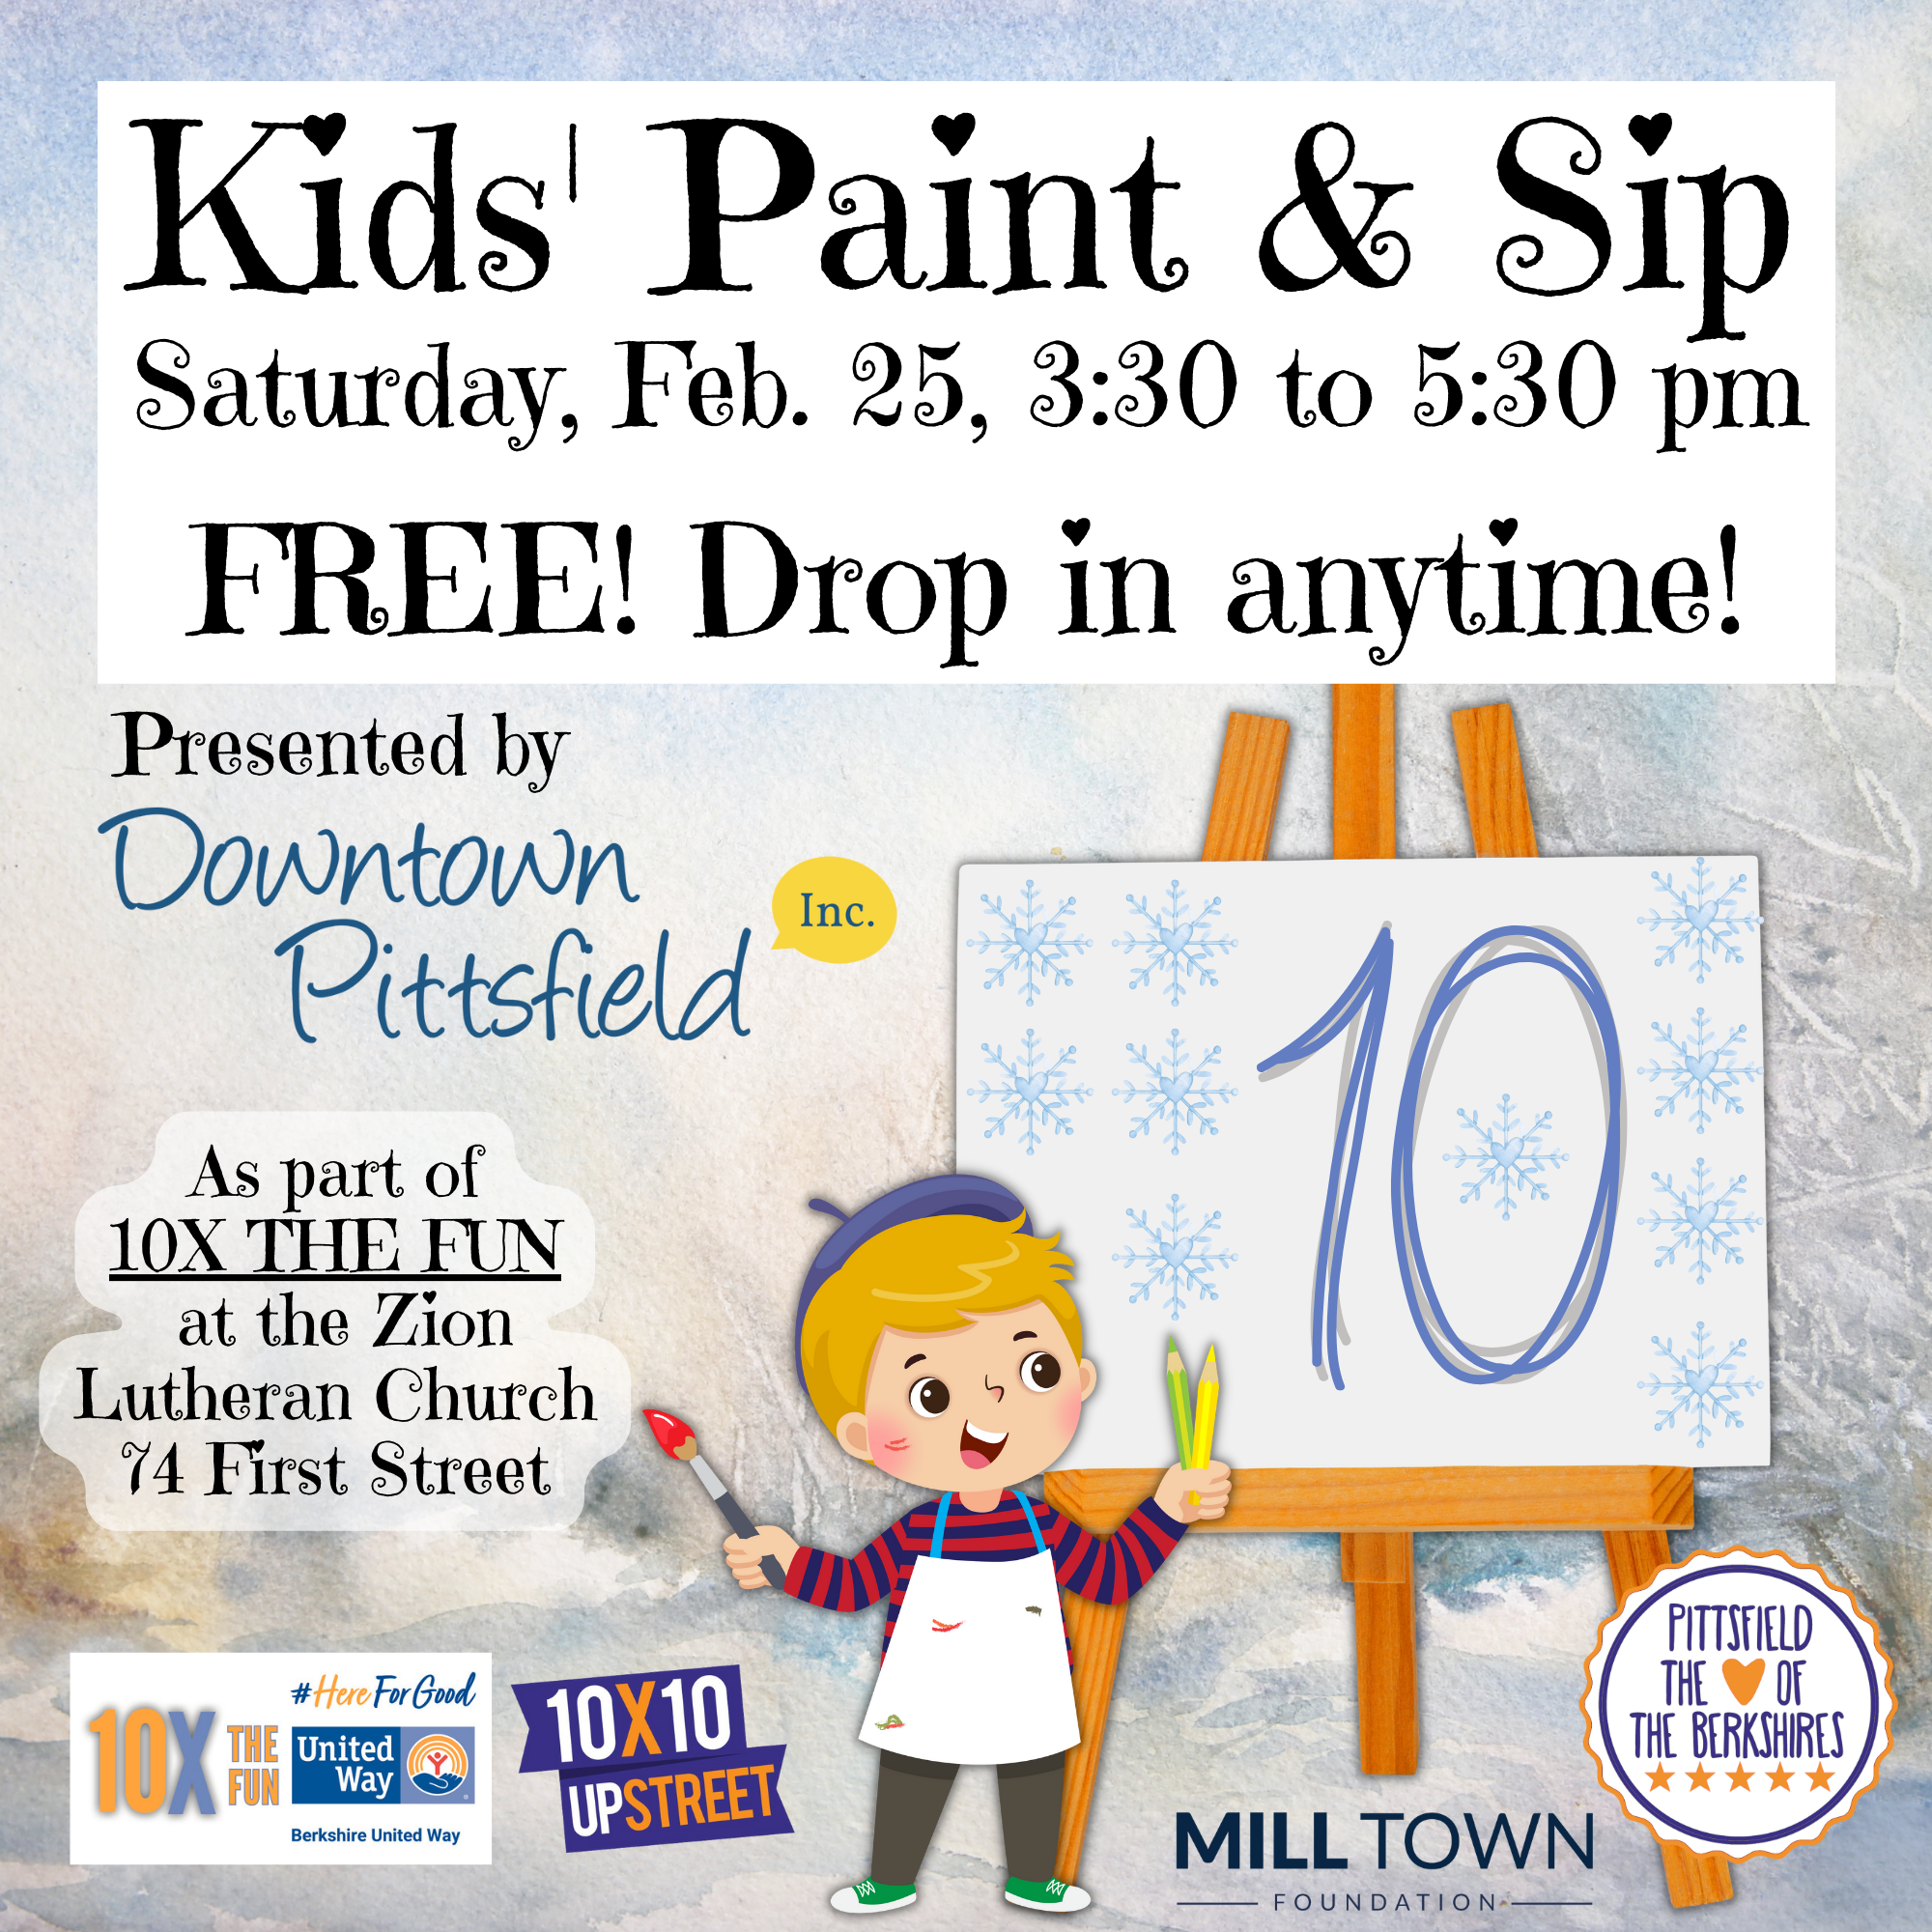 Free Kids’ Paint & Sip as part of 10X The FUN!